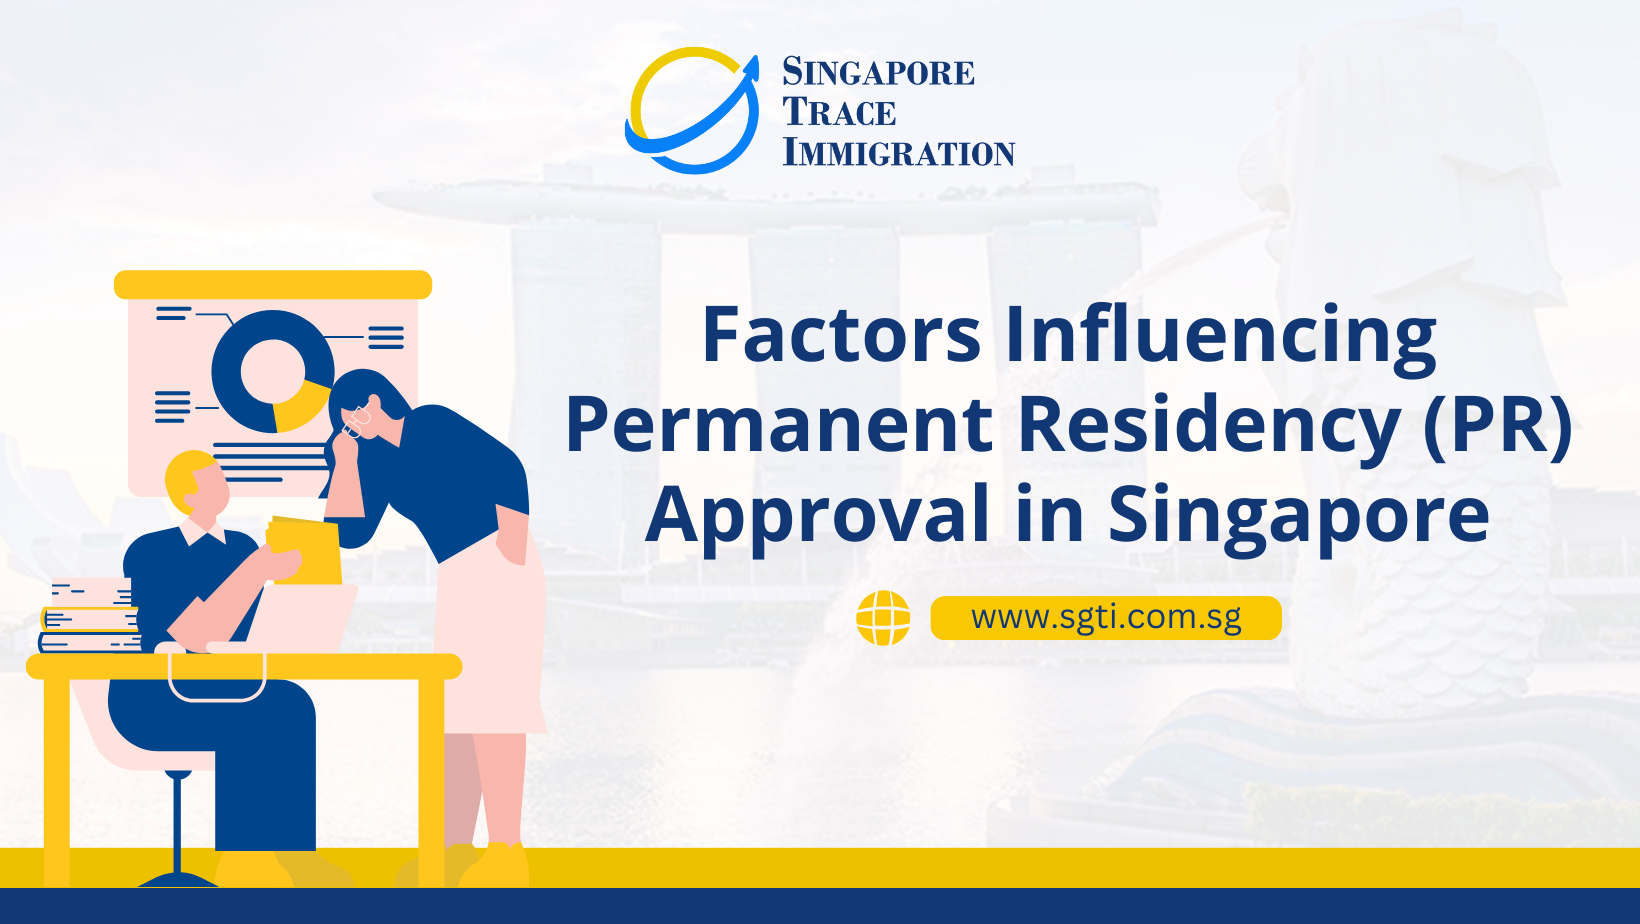 Factors Influencing Permanent Residency (PR) Approval in Singapore